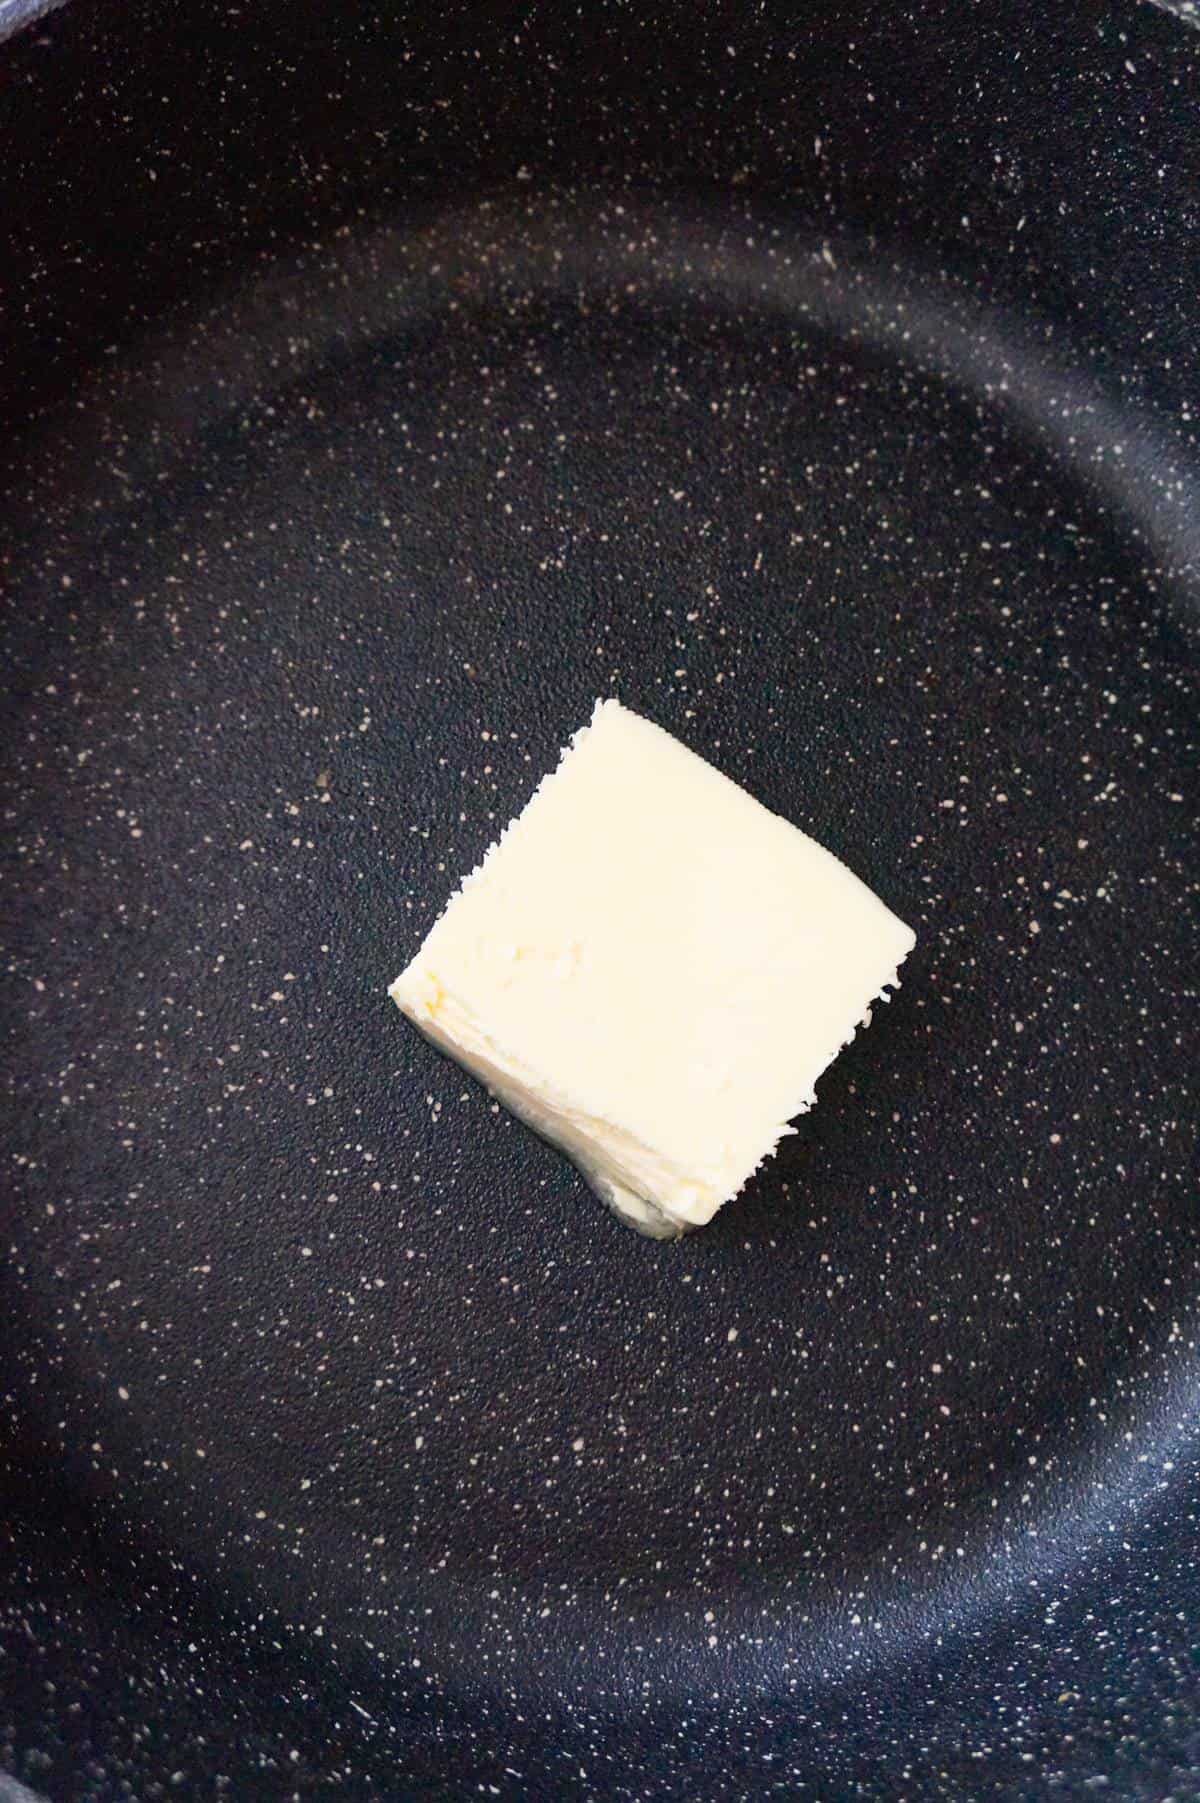 butter in a large pot